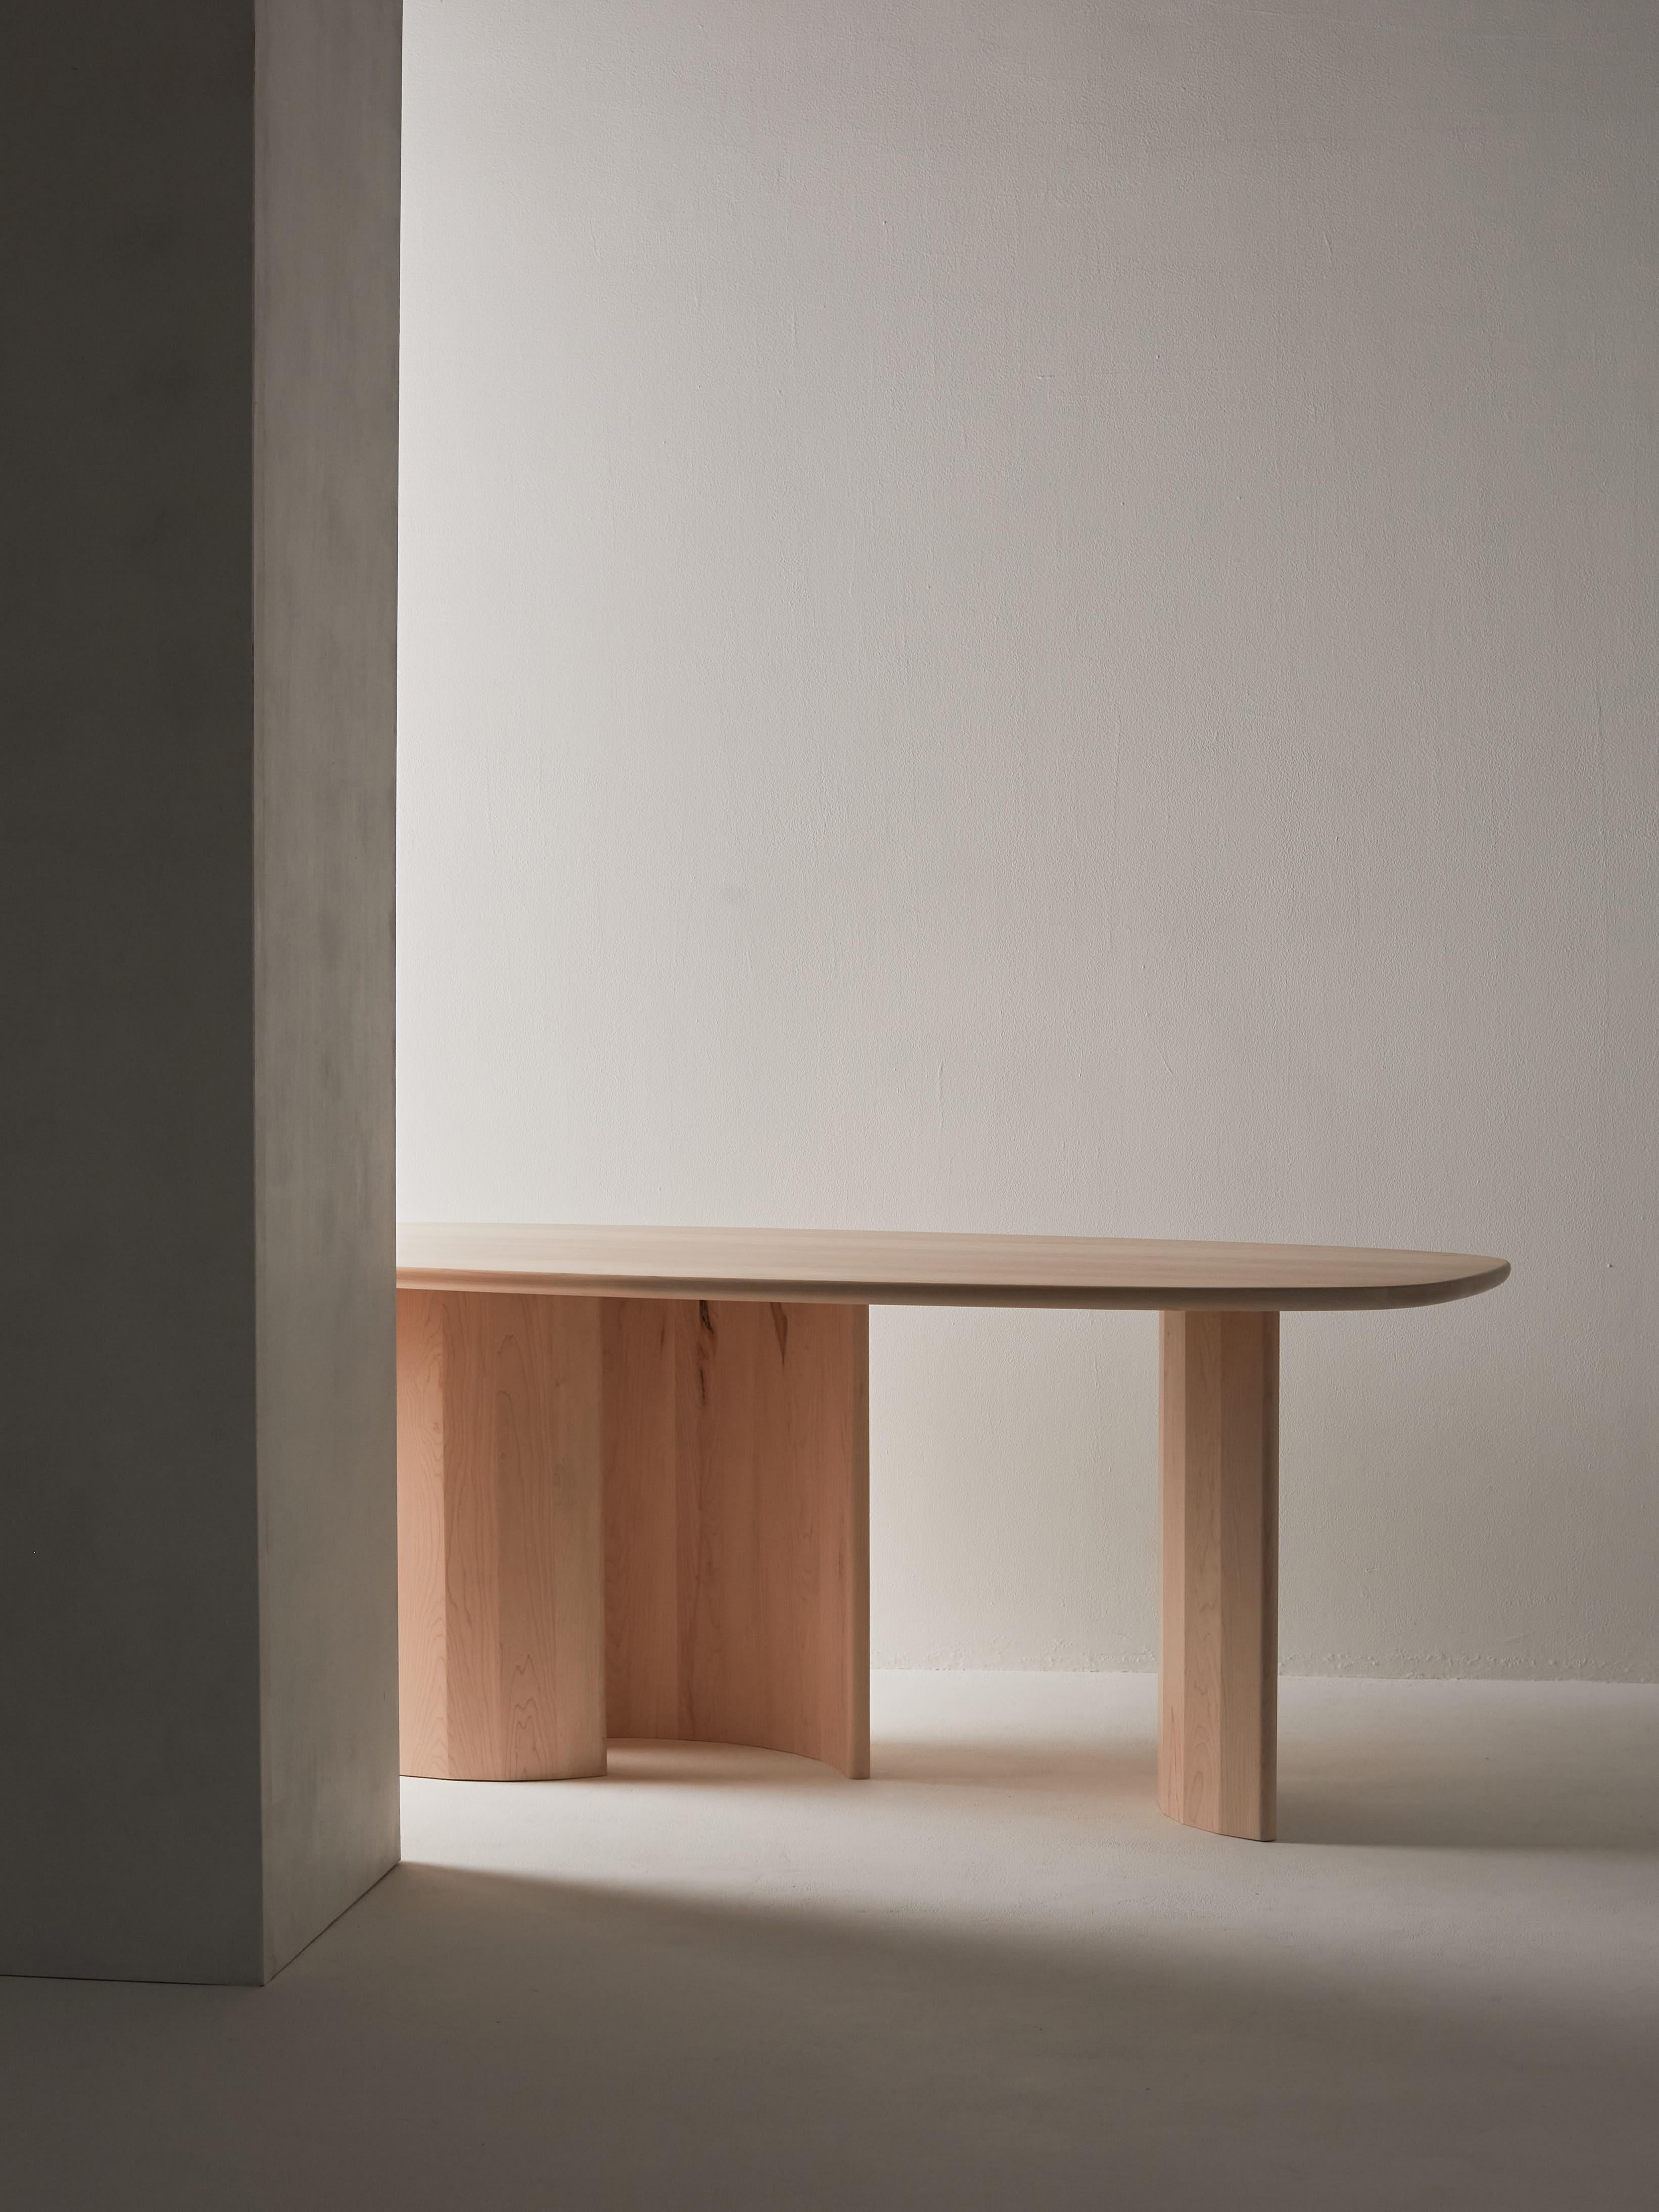 Hand-Crafted Contemporary Organic Sculptural Maple Wood Dining Table for Richard by Campagna